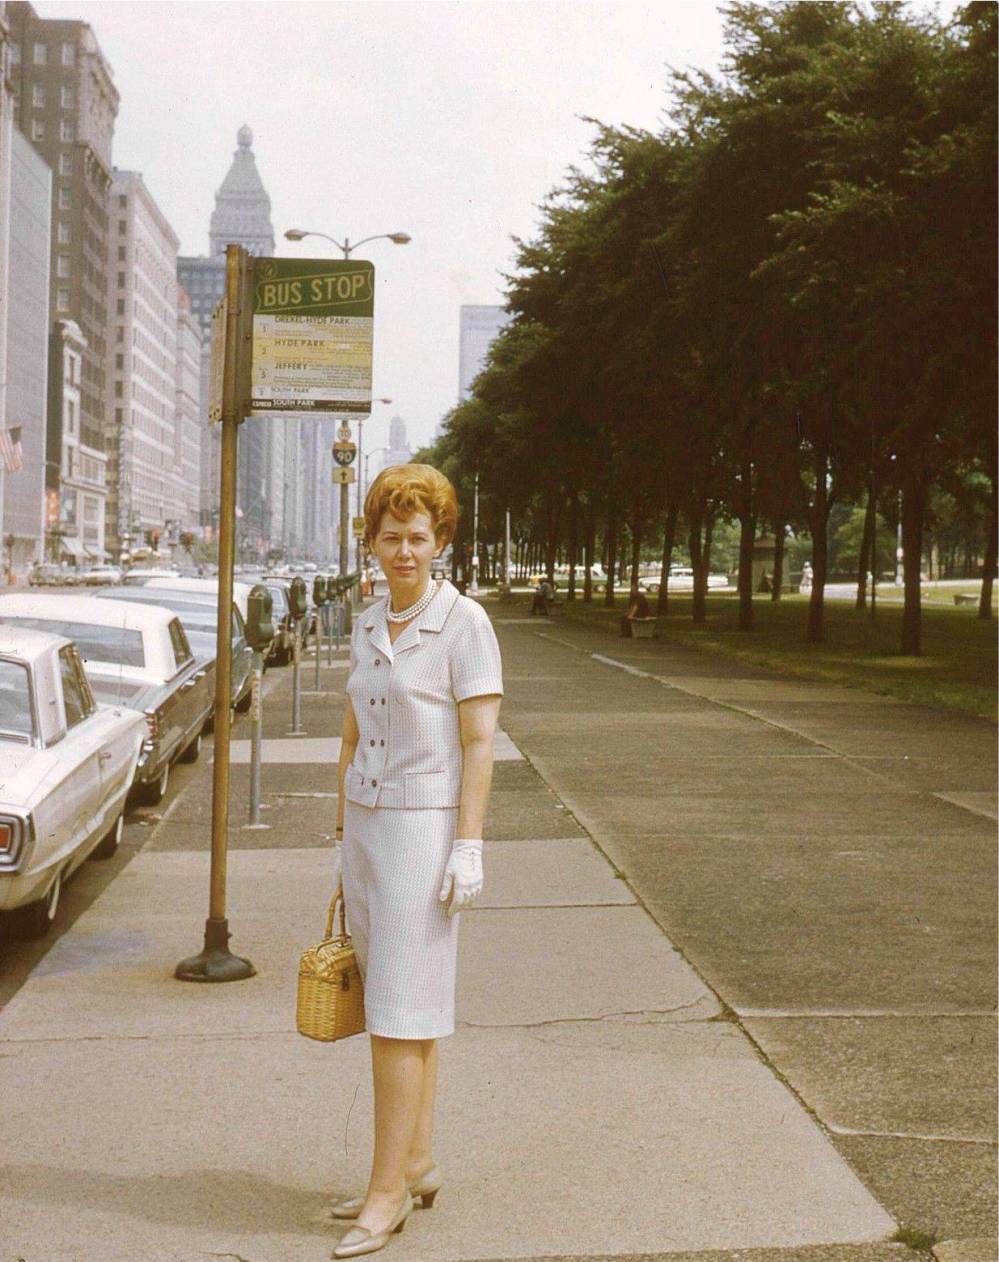 PHOTO - CHICAGO - MICHIGAN AVE - LOOKING N - WOMAN WAITING AT BUS STOP - GRANT PARK ON RIGHT - c1960 - UNKNOWN PHOTOGRAPHER